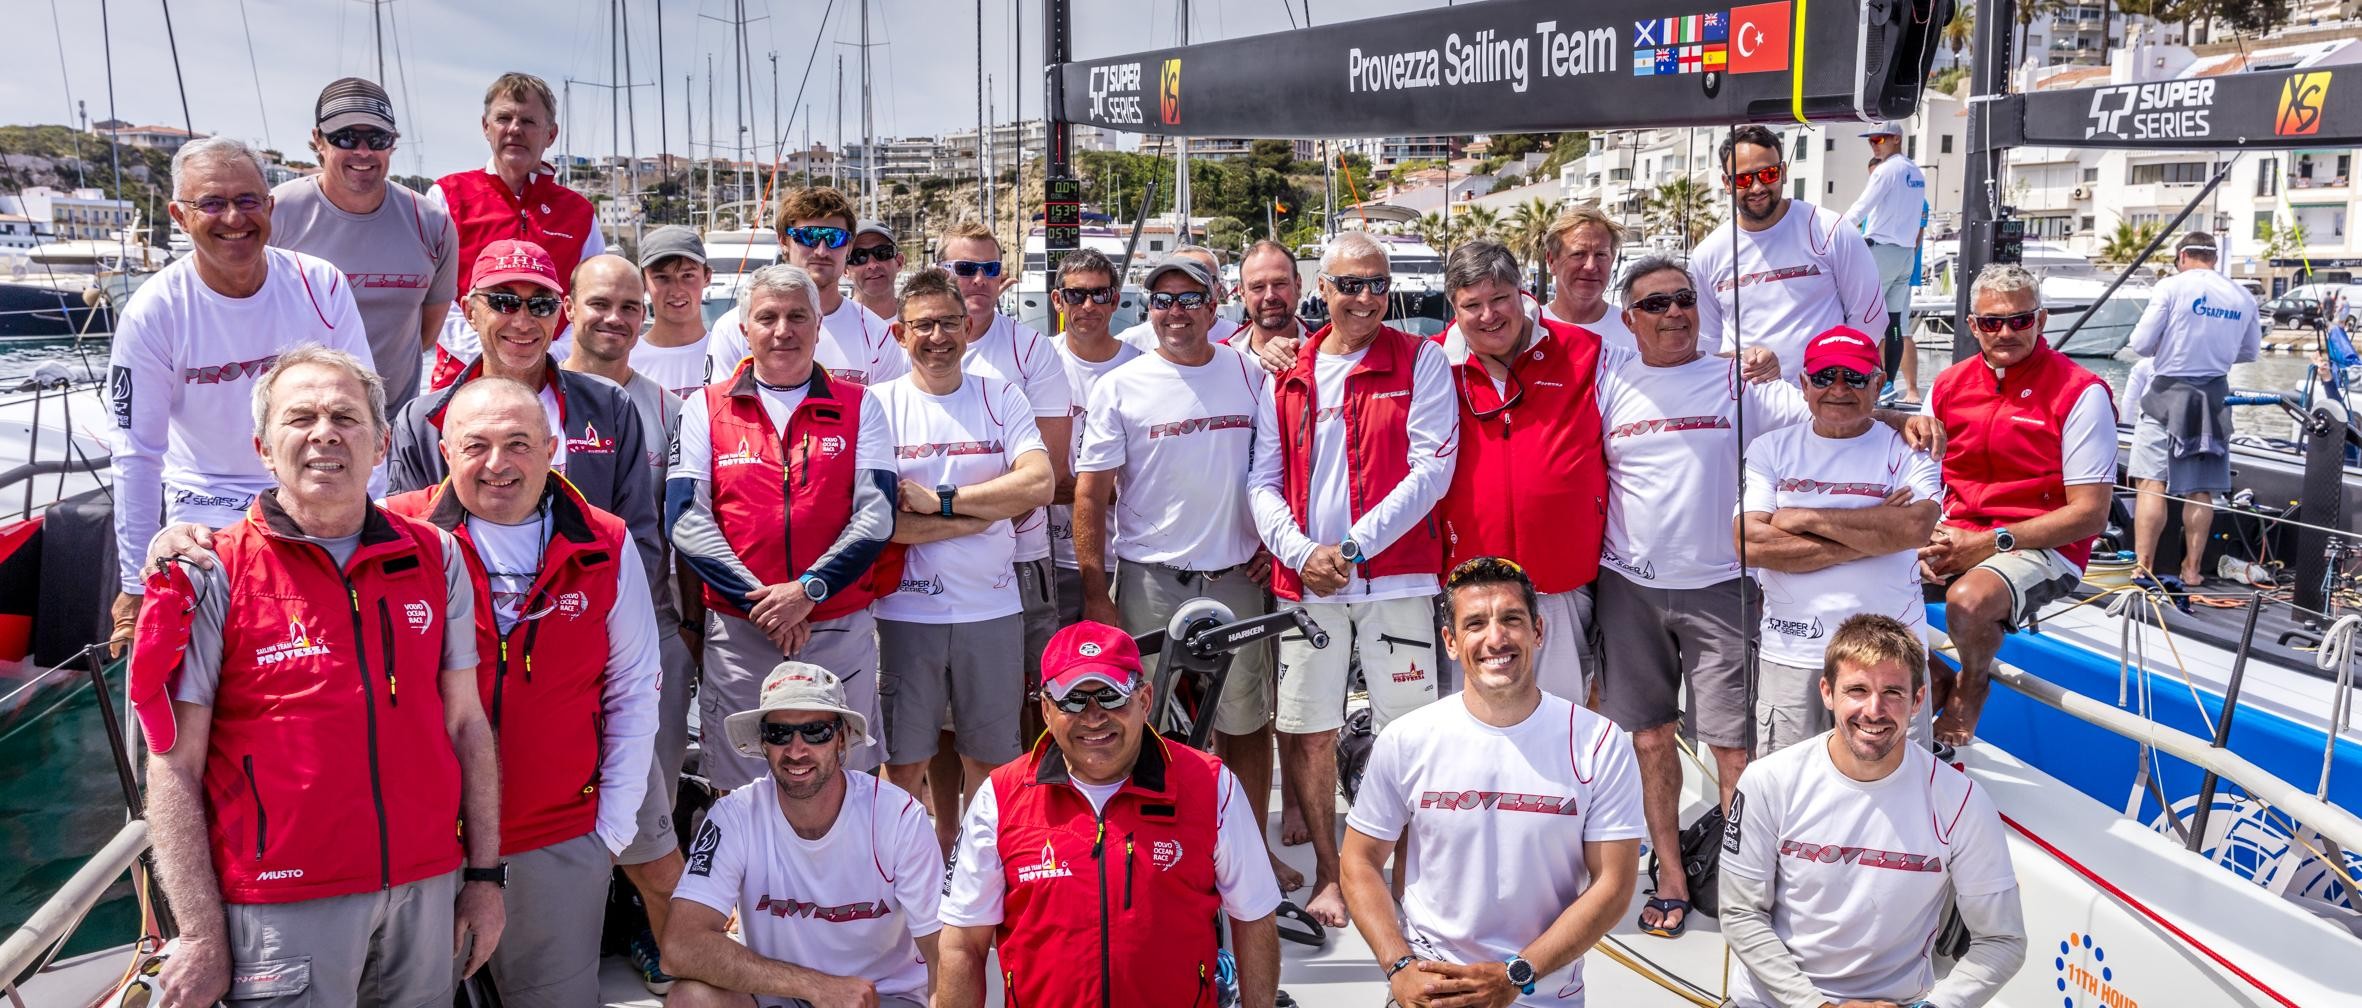 Provezza Are Crowned 52 Super Series Greenest Team of the Year